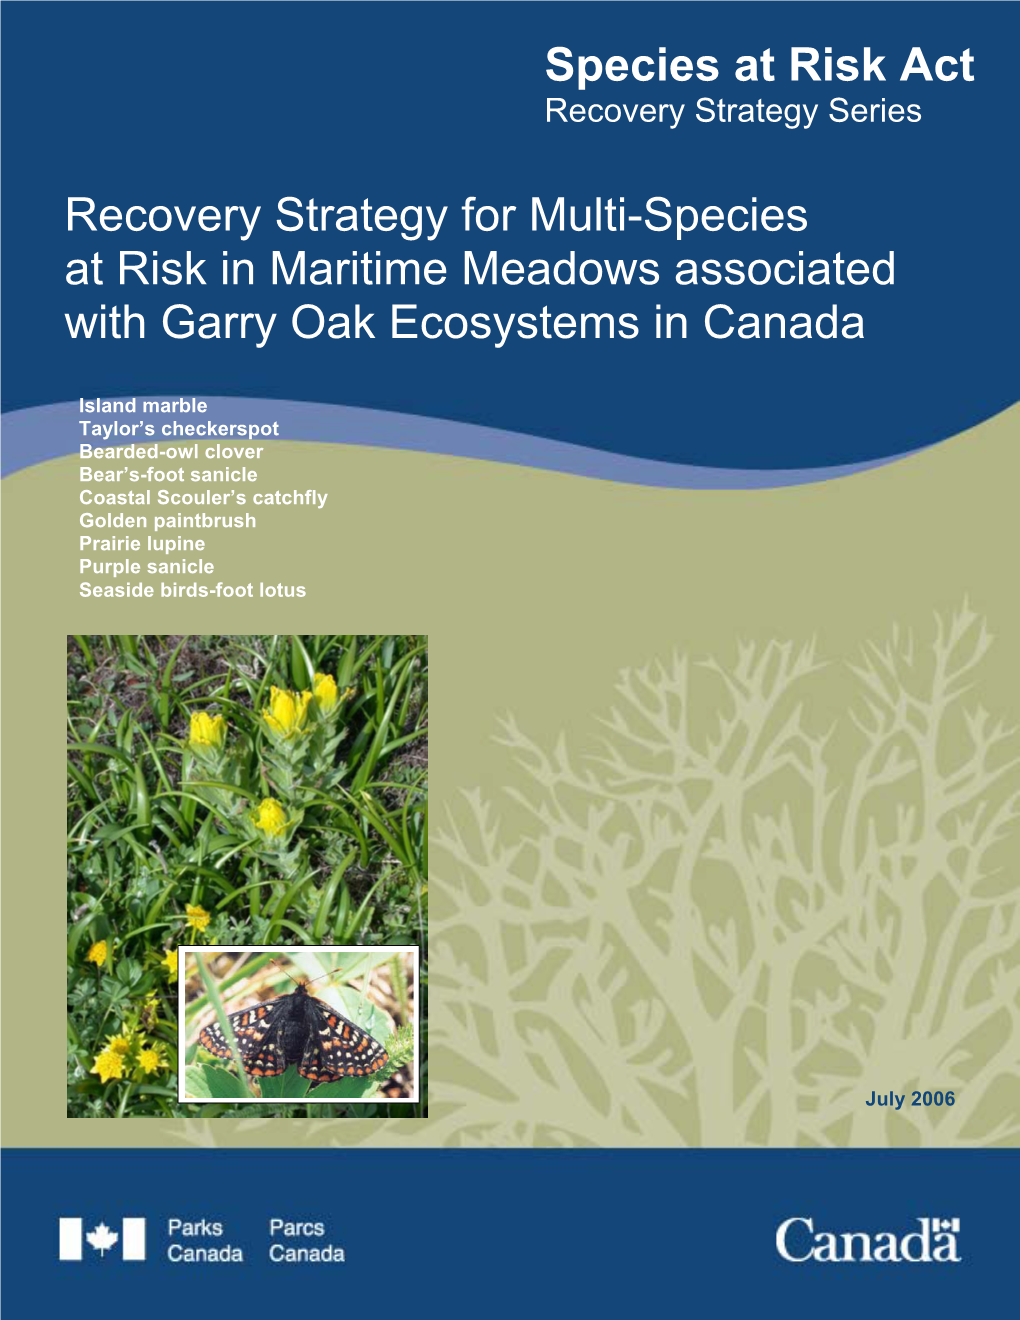 Recovery Strategy for Multi-Species at Risk in Maritime Meadows Associated with Garry Oak Ecosystems in Canada